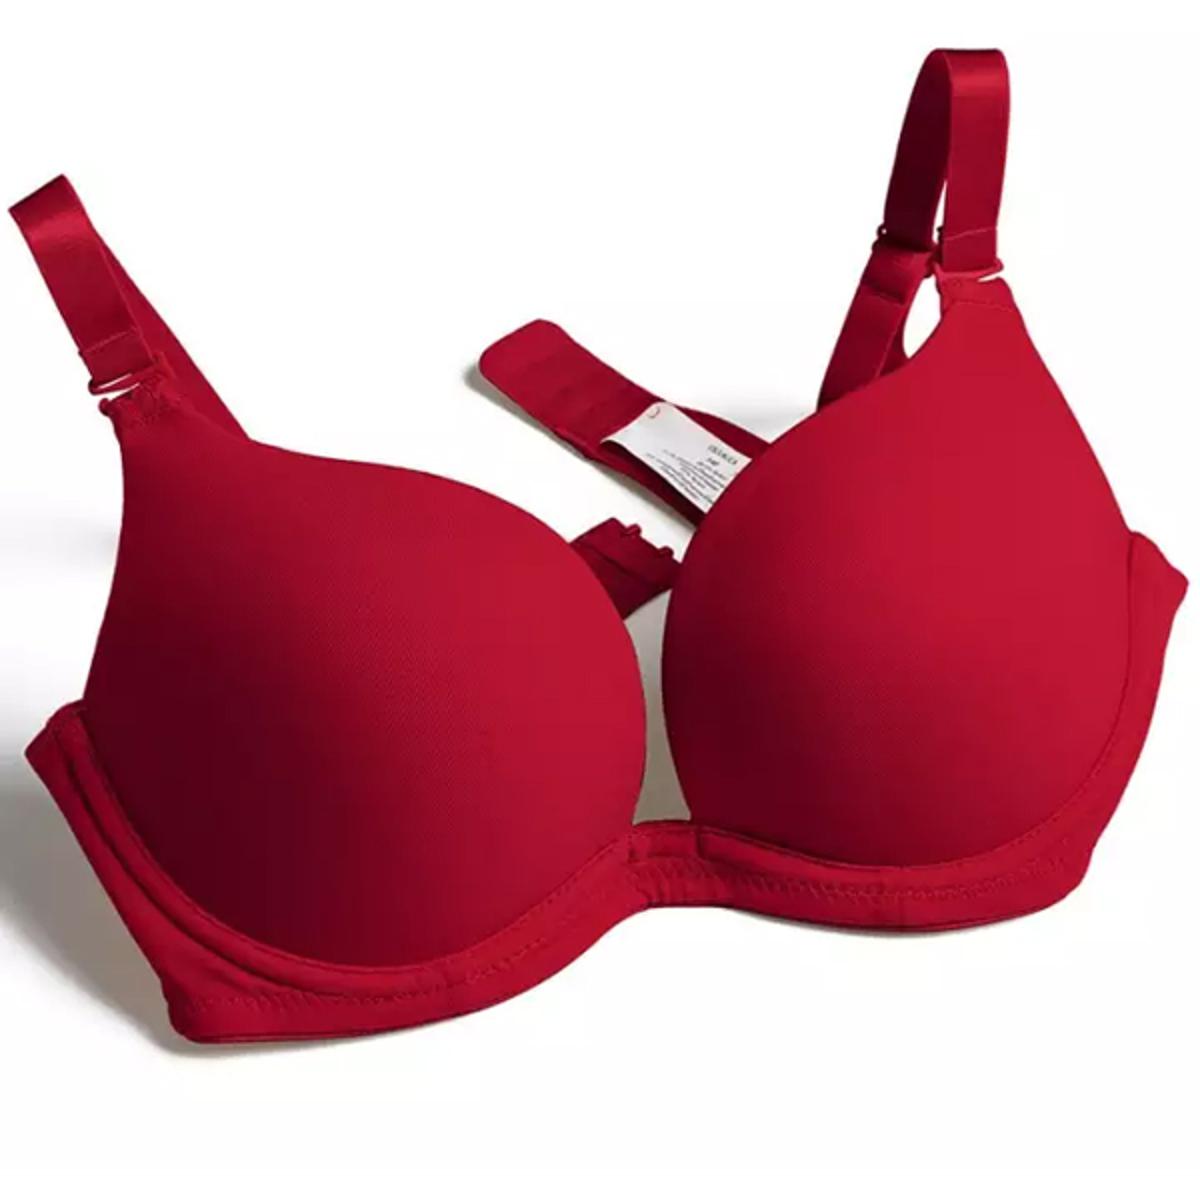 Bra for girl, Export Quality Foam Bra for girls or women, Body Fitting  Stylish And Comfortable Bra